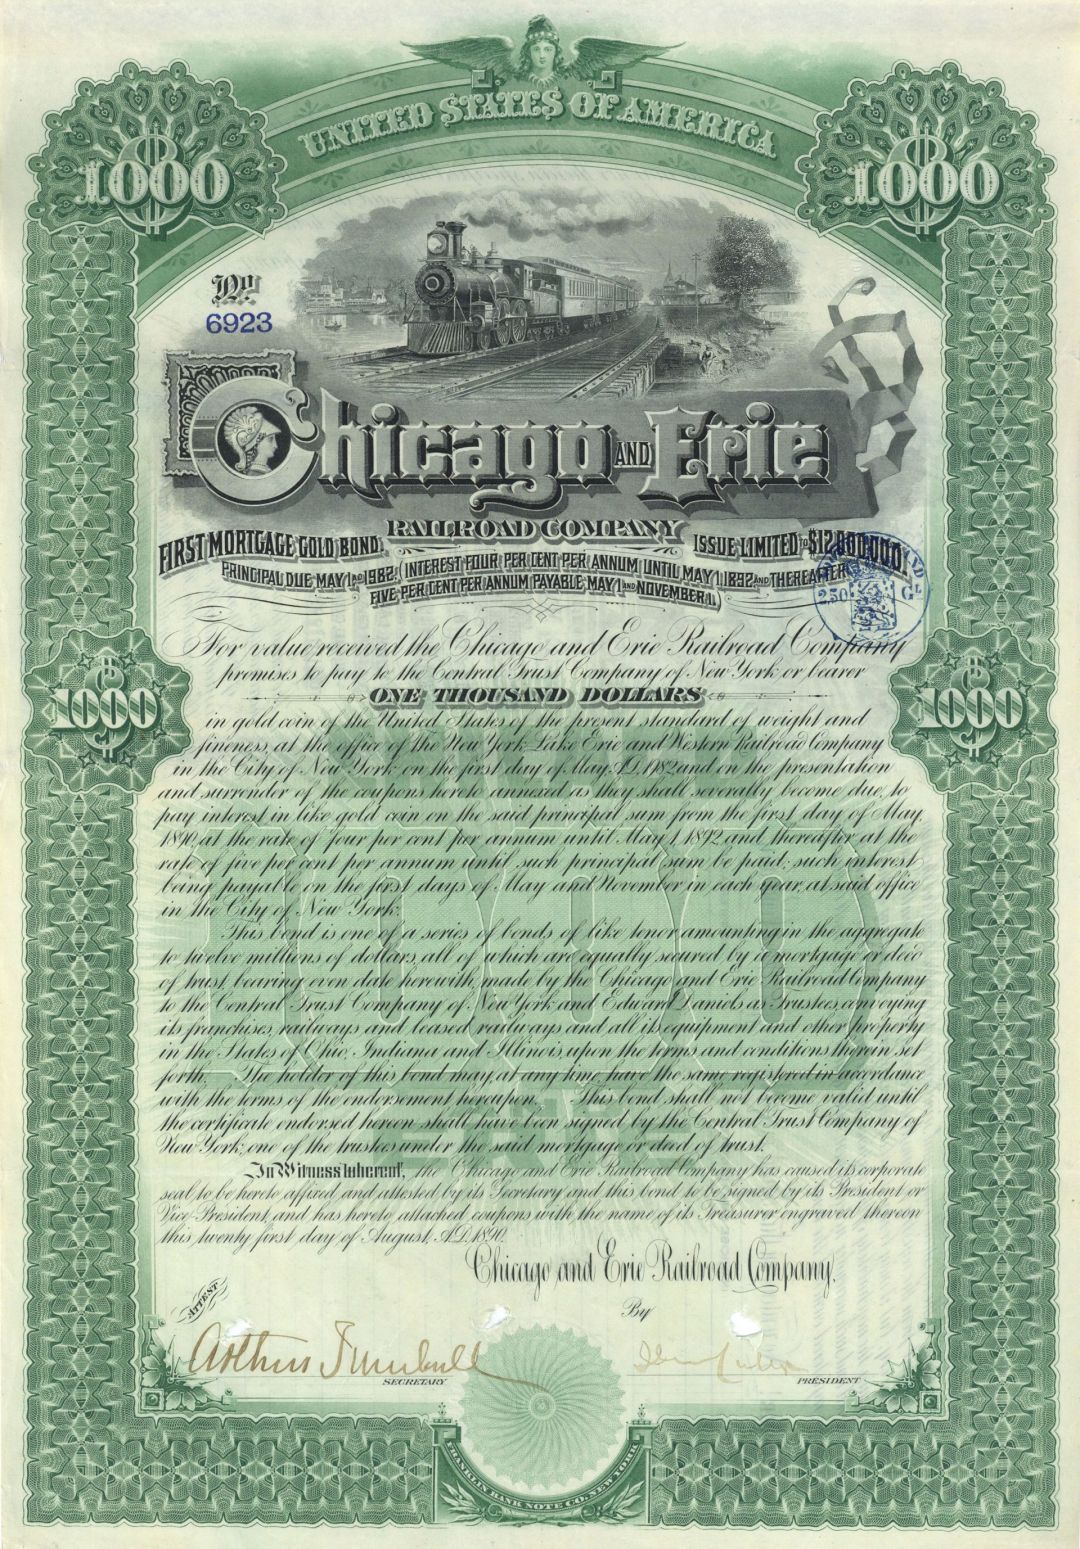 Chicago and Erie Railroad Co. - 1890 dated $1,000 Railway Gold Bond - Also Known as the Chicago and Atlantic Railroad